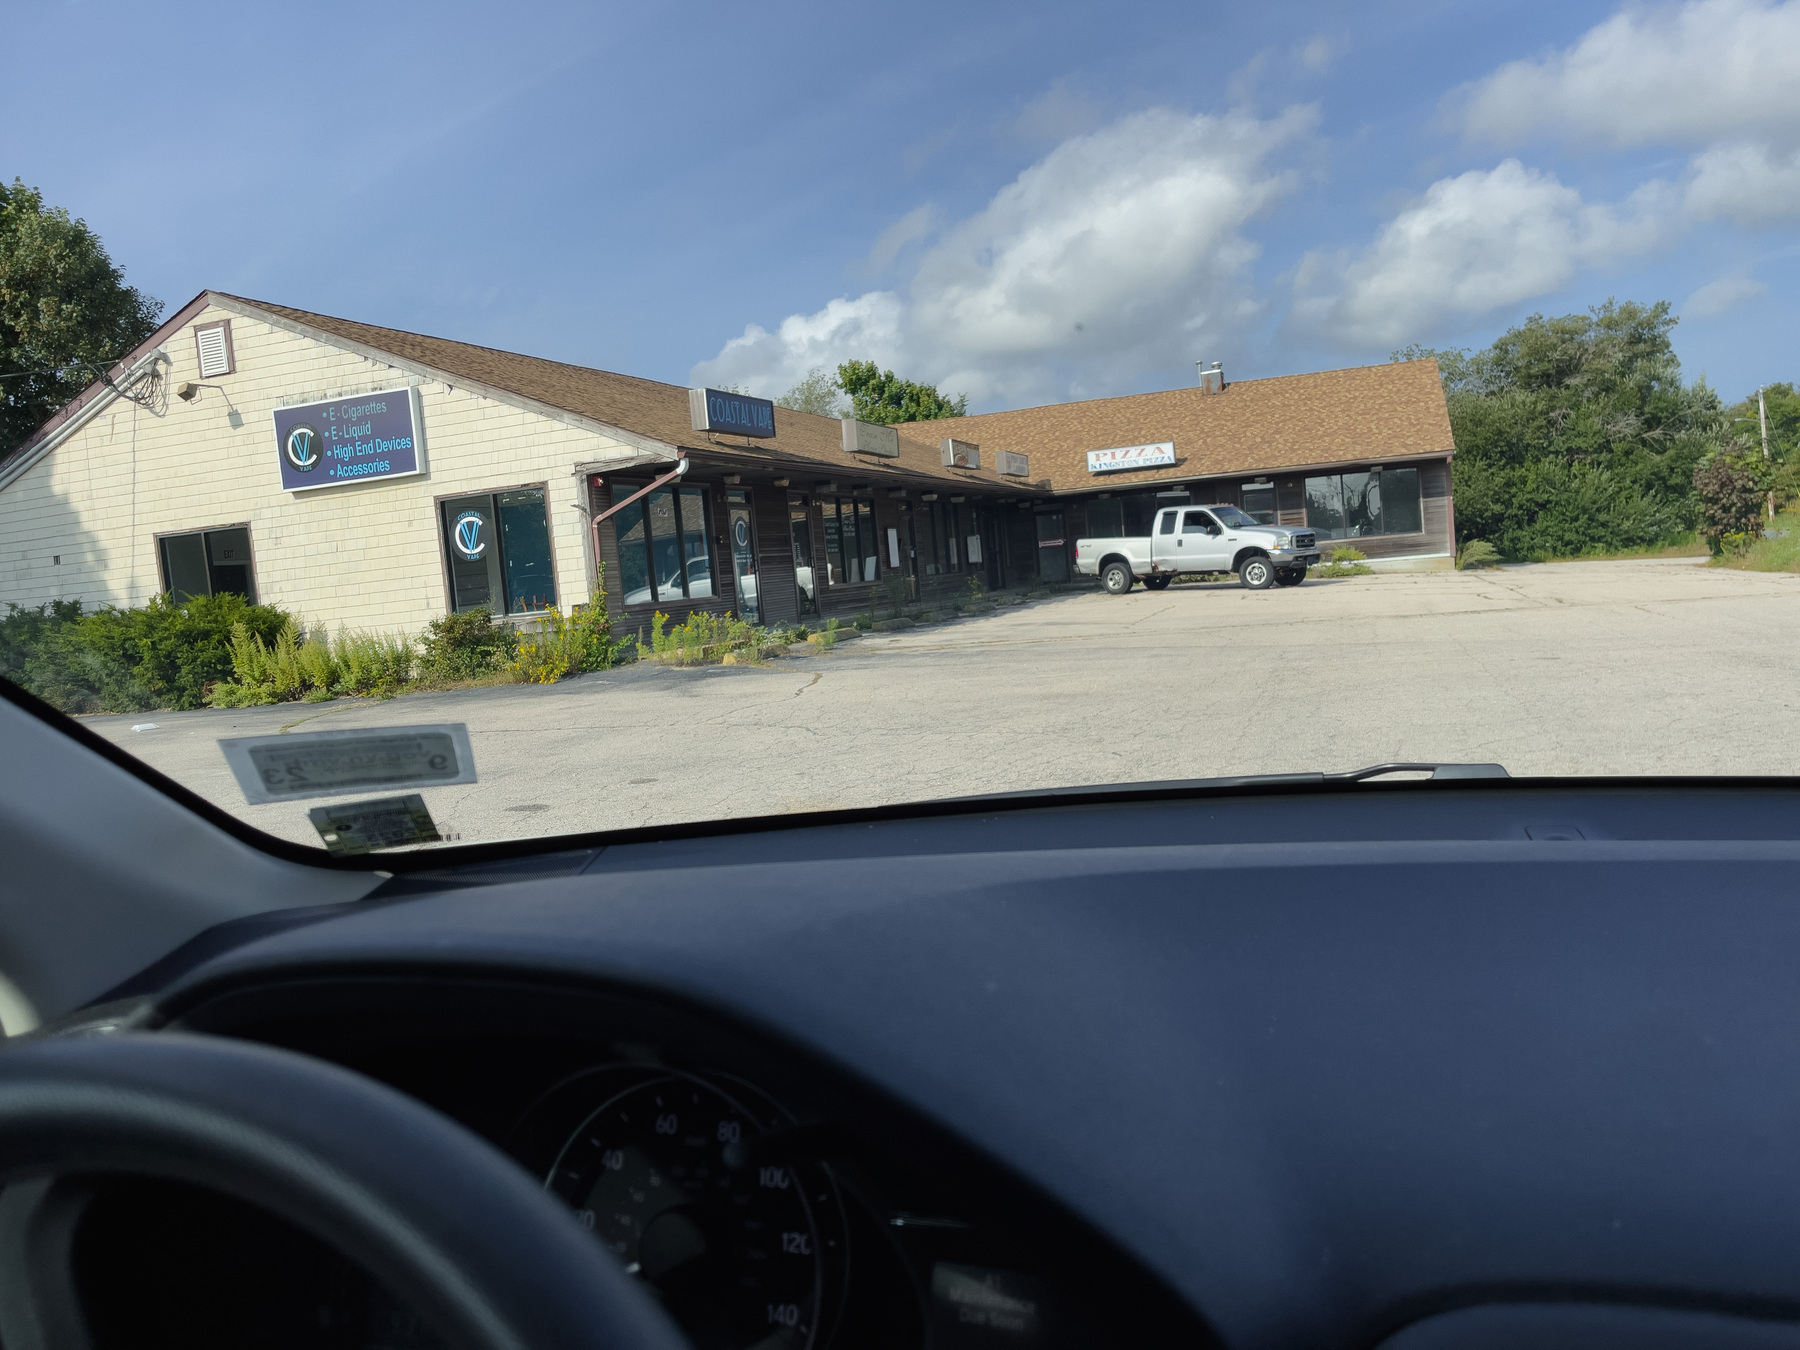 Strip mall buildings throughout car windshield.